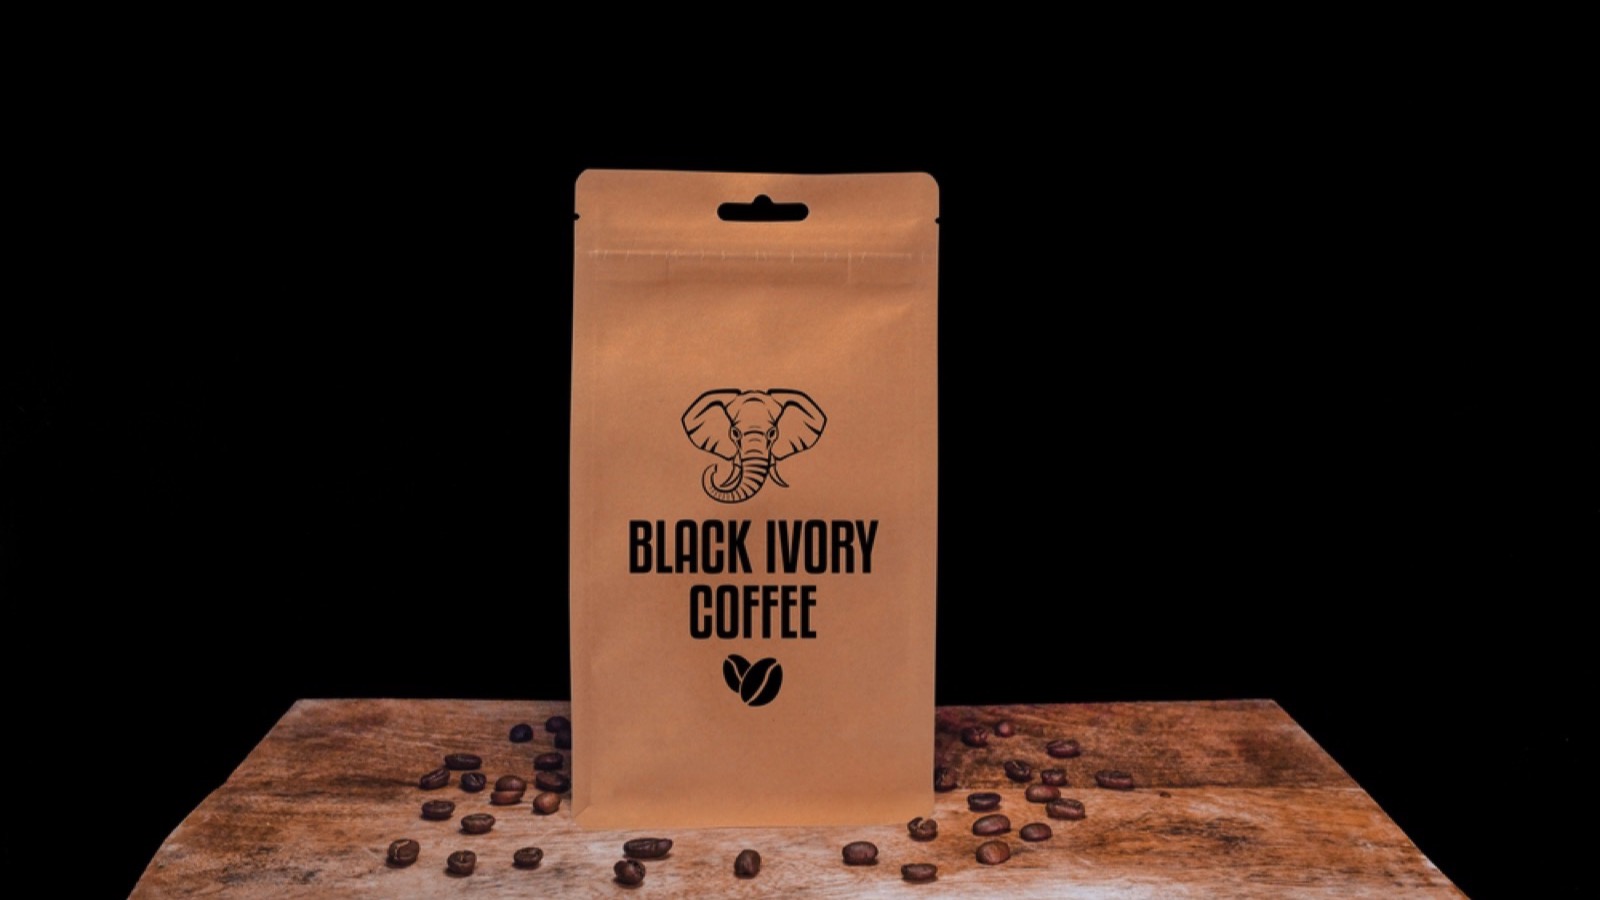 Black Ivory coffee beans and eco friendly kraft paper package on wooden board with black isolated background.